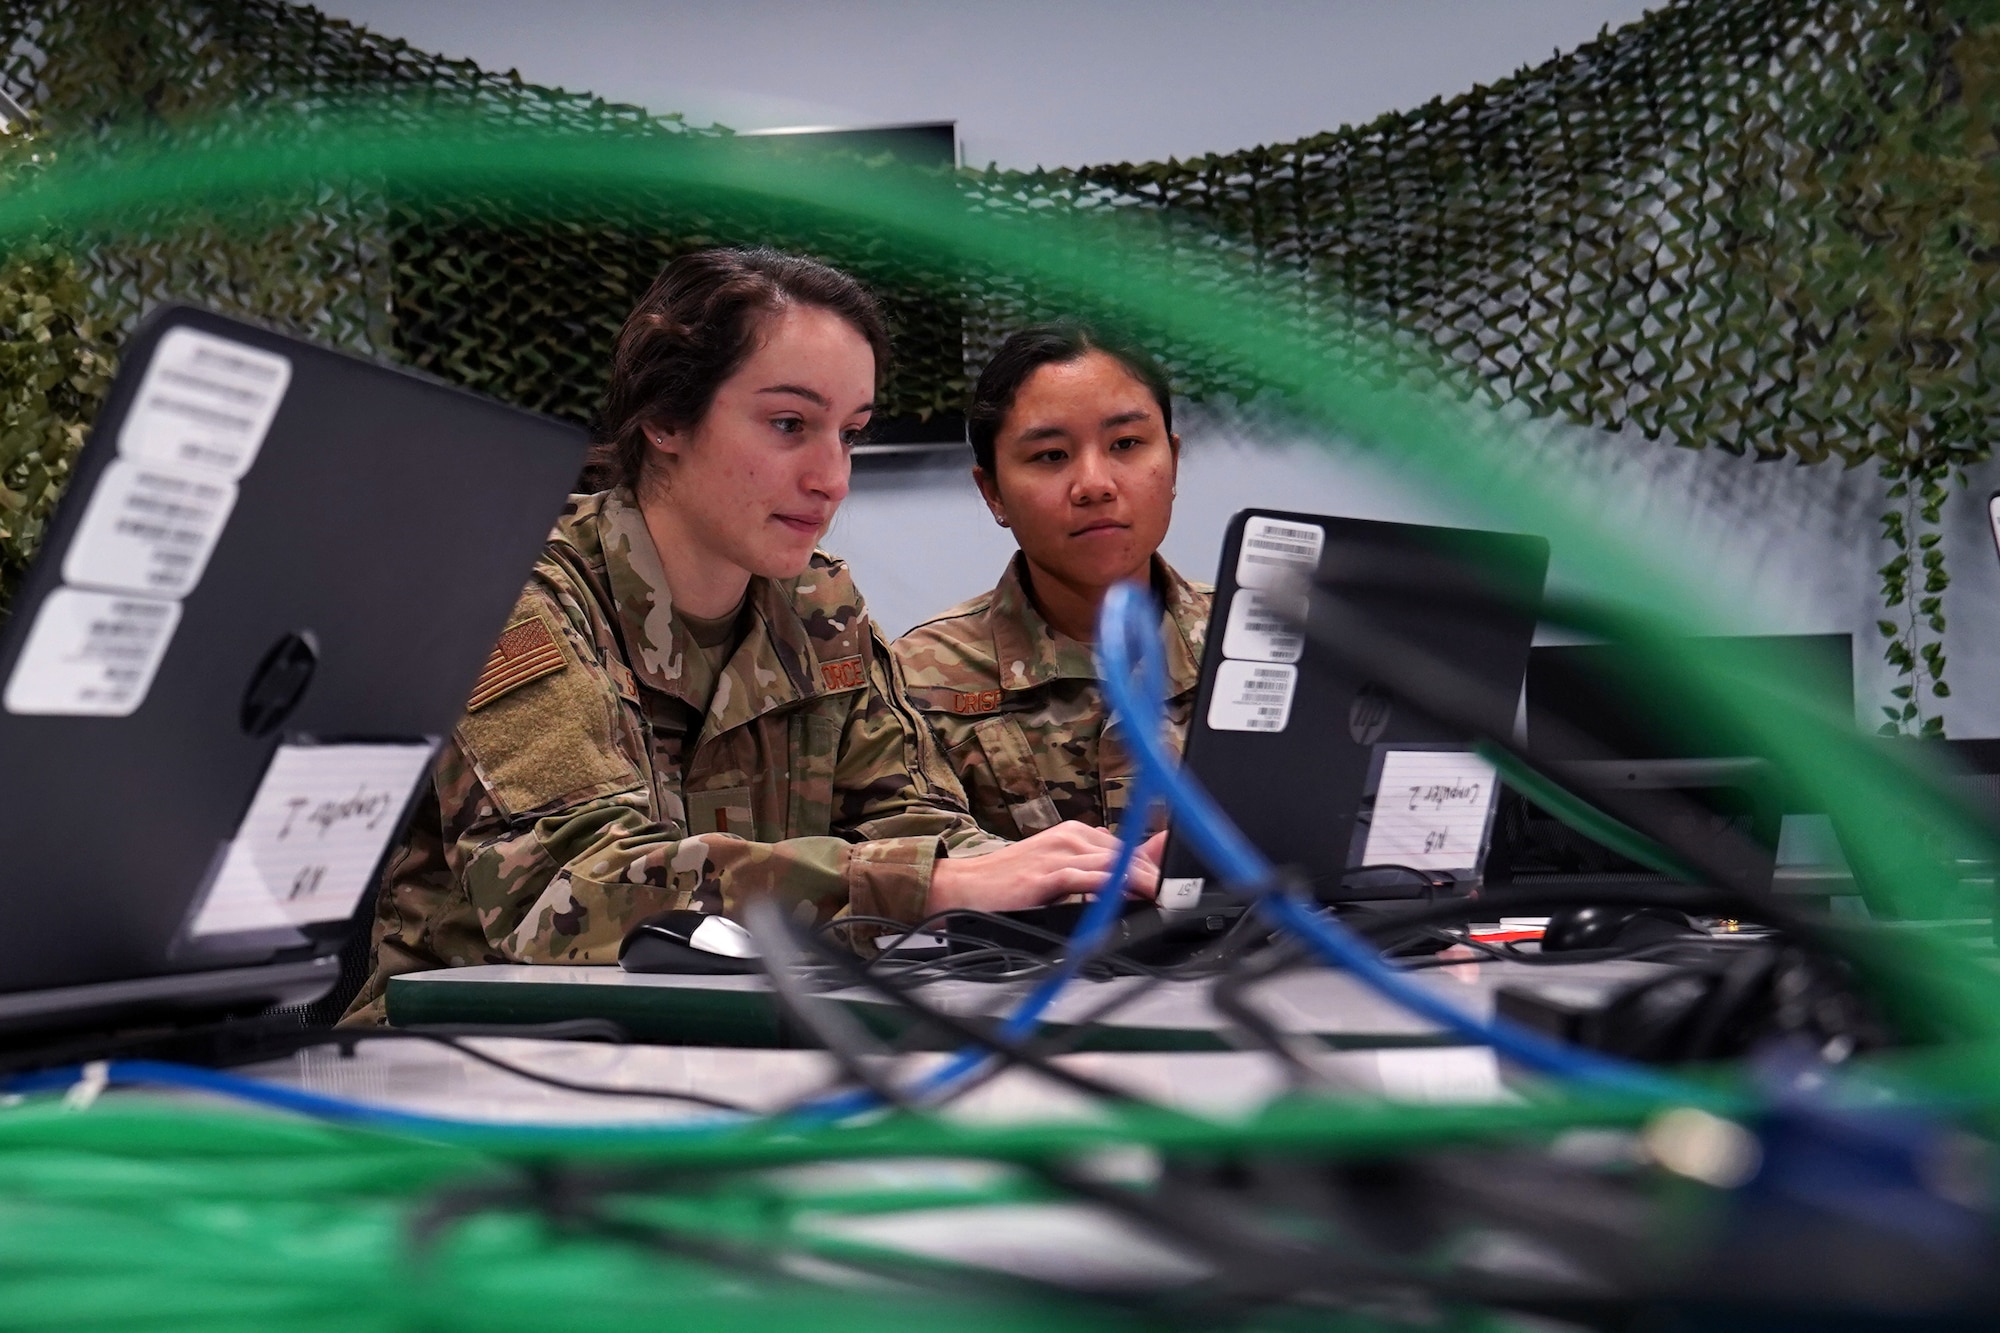 U.S. Air Force 2nd Lt. Alexis Shirley and 2nd Lt. Trisha Crisp, 333rd Training Squadron cyber warfare officers, complete cyber tasks in the cyber escape room inside Stennis Hall at Keesler Air Force Base, Mississippi, November 10, 2021. The escape room was implemented into the squadron to test the capabilities of cyber warfare students and sharpen their skillset. (U.S. Air Force photo by Senior Airman Seth Haddix)